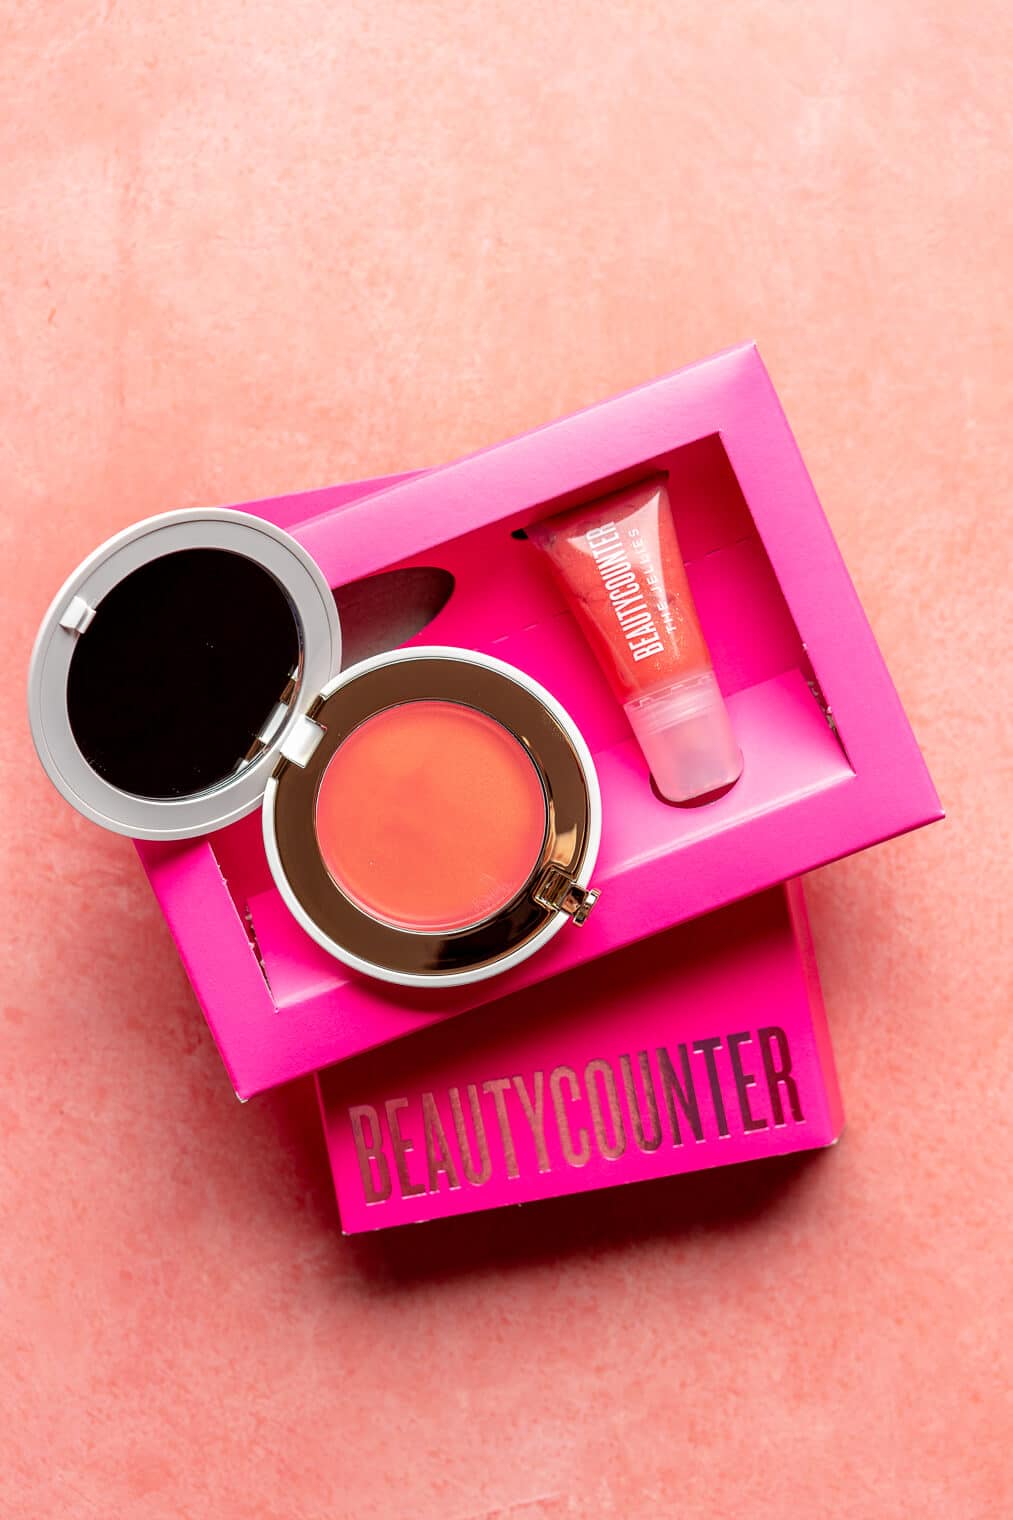 Top down view of Gloss and Glow duo. The cream blush is open next to a lip jelly. Both are sitting on top of a fuchsia box on a pink blush surface.